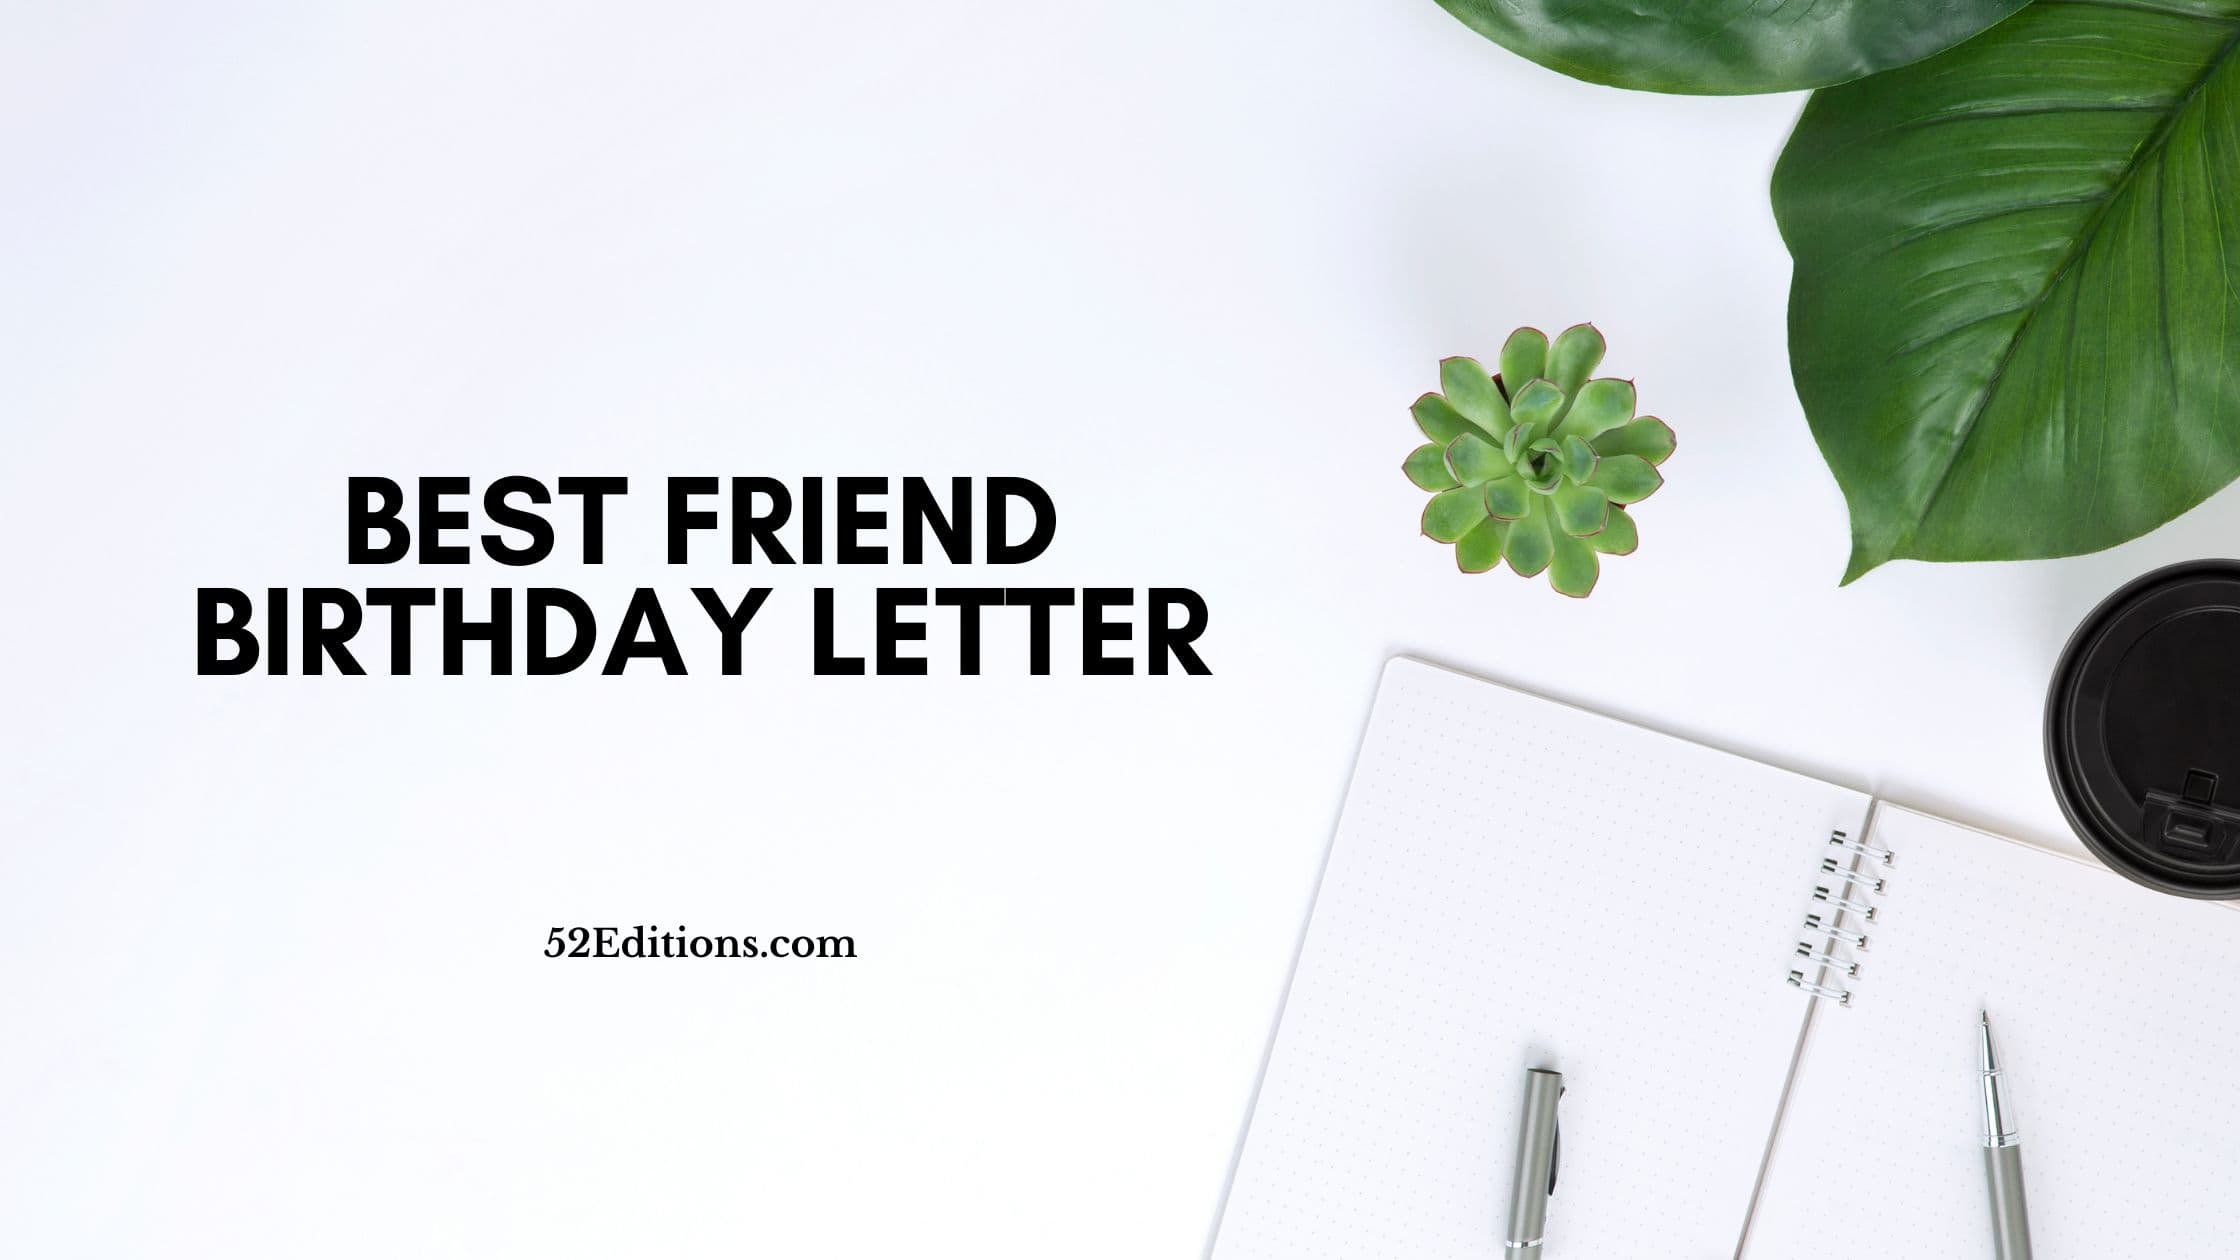 best-friend-birthday-letter-get-free-letter-templates-print-or-download